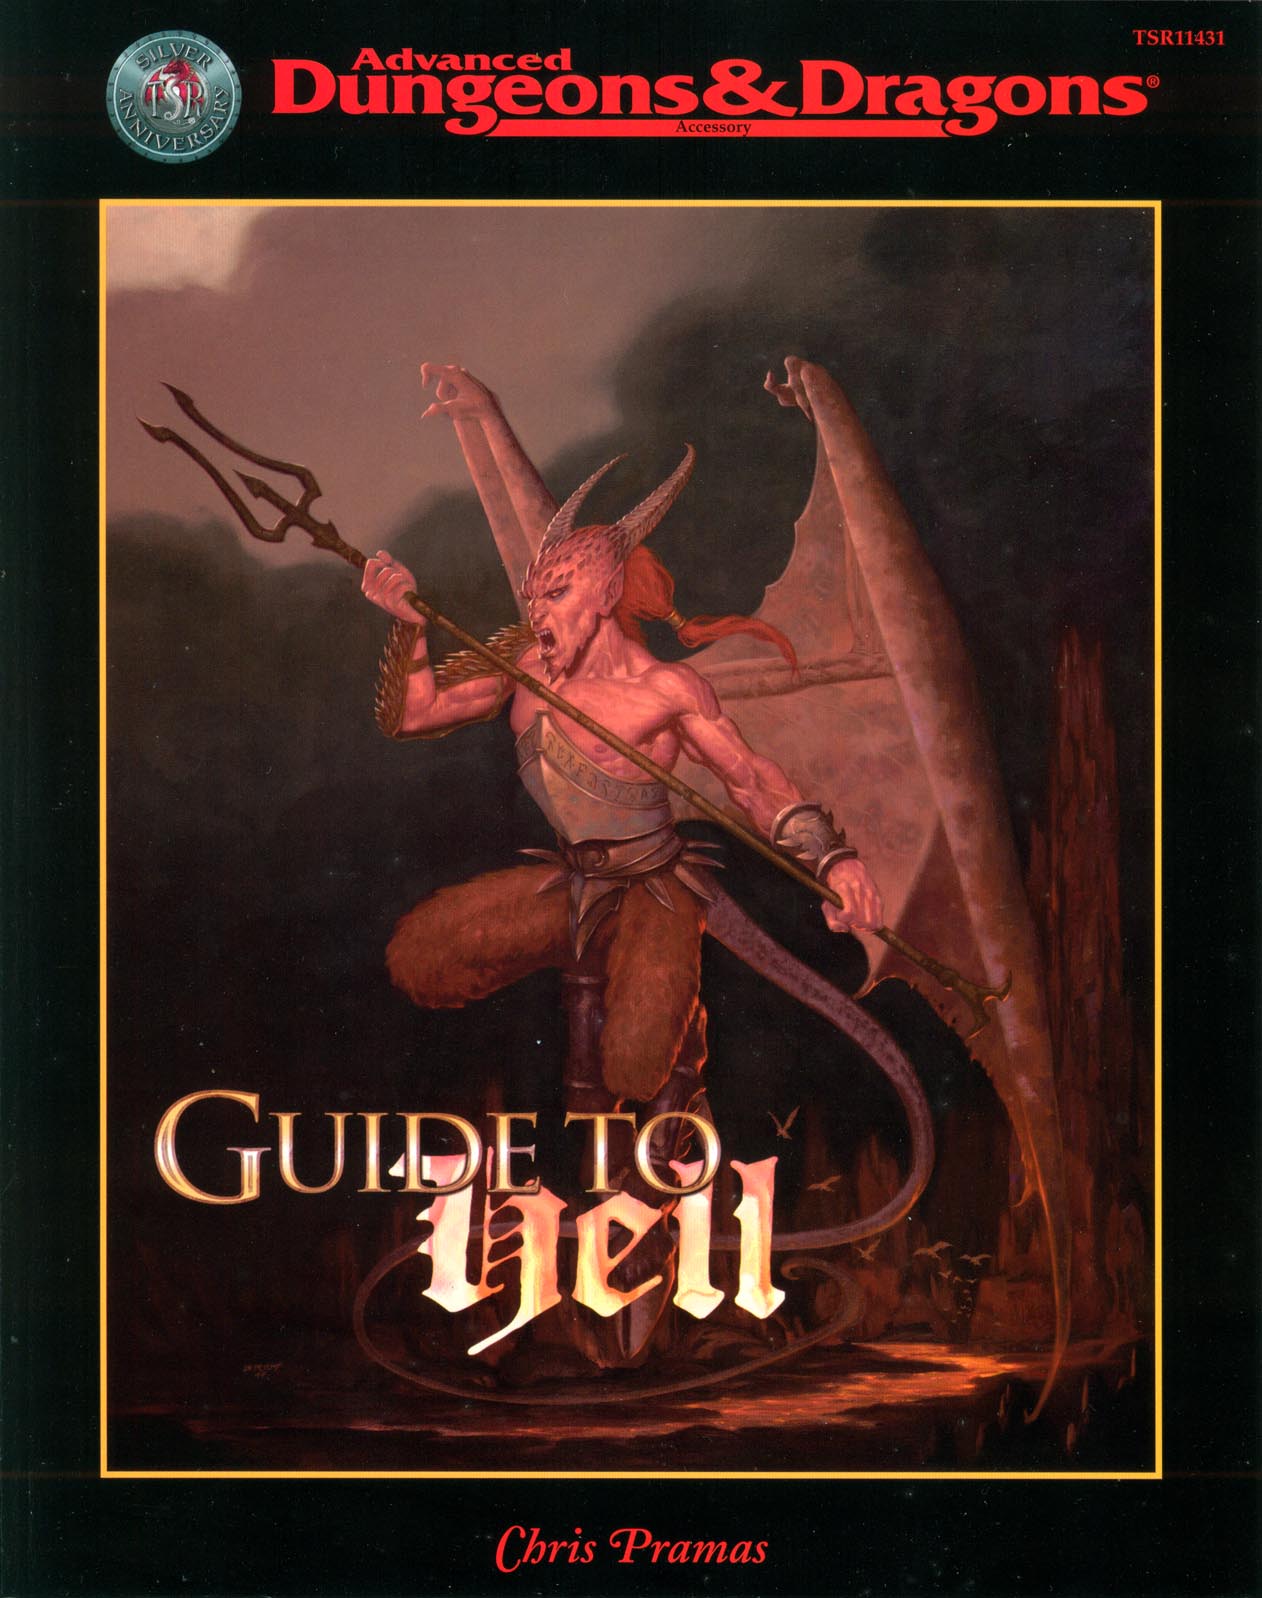 Guide to HellCover art